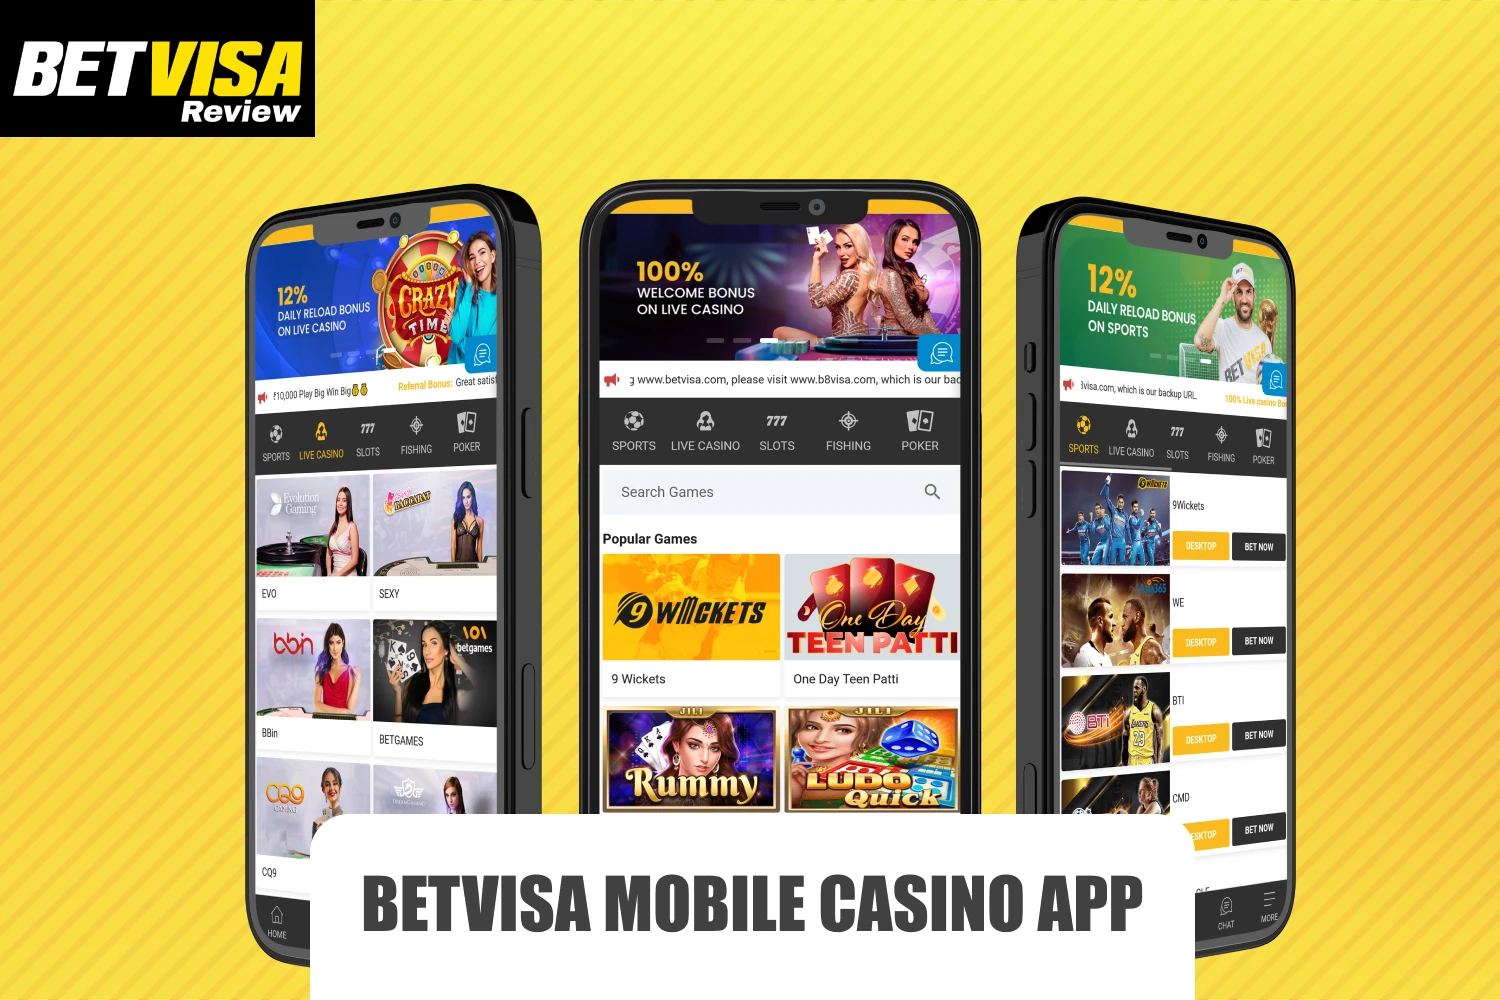 The Betvisa app offers players from India easy navigation, high quality graphics and over 1,500 games for mobile devices